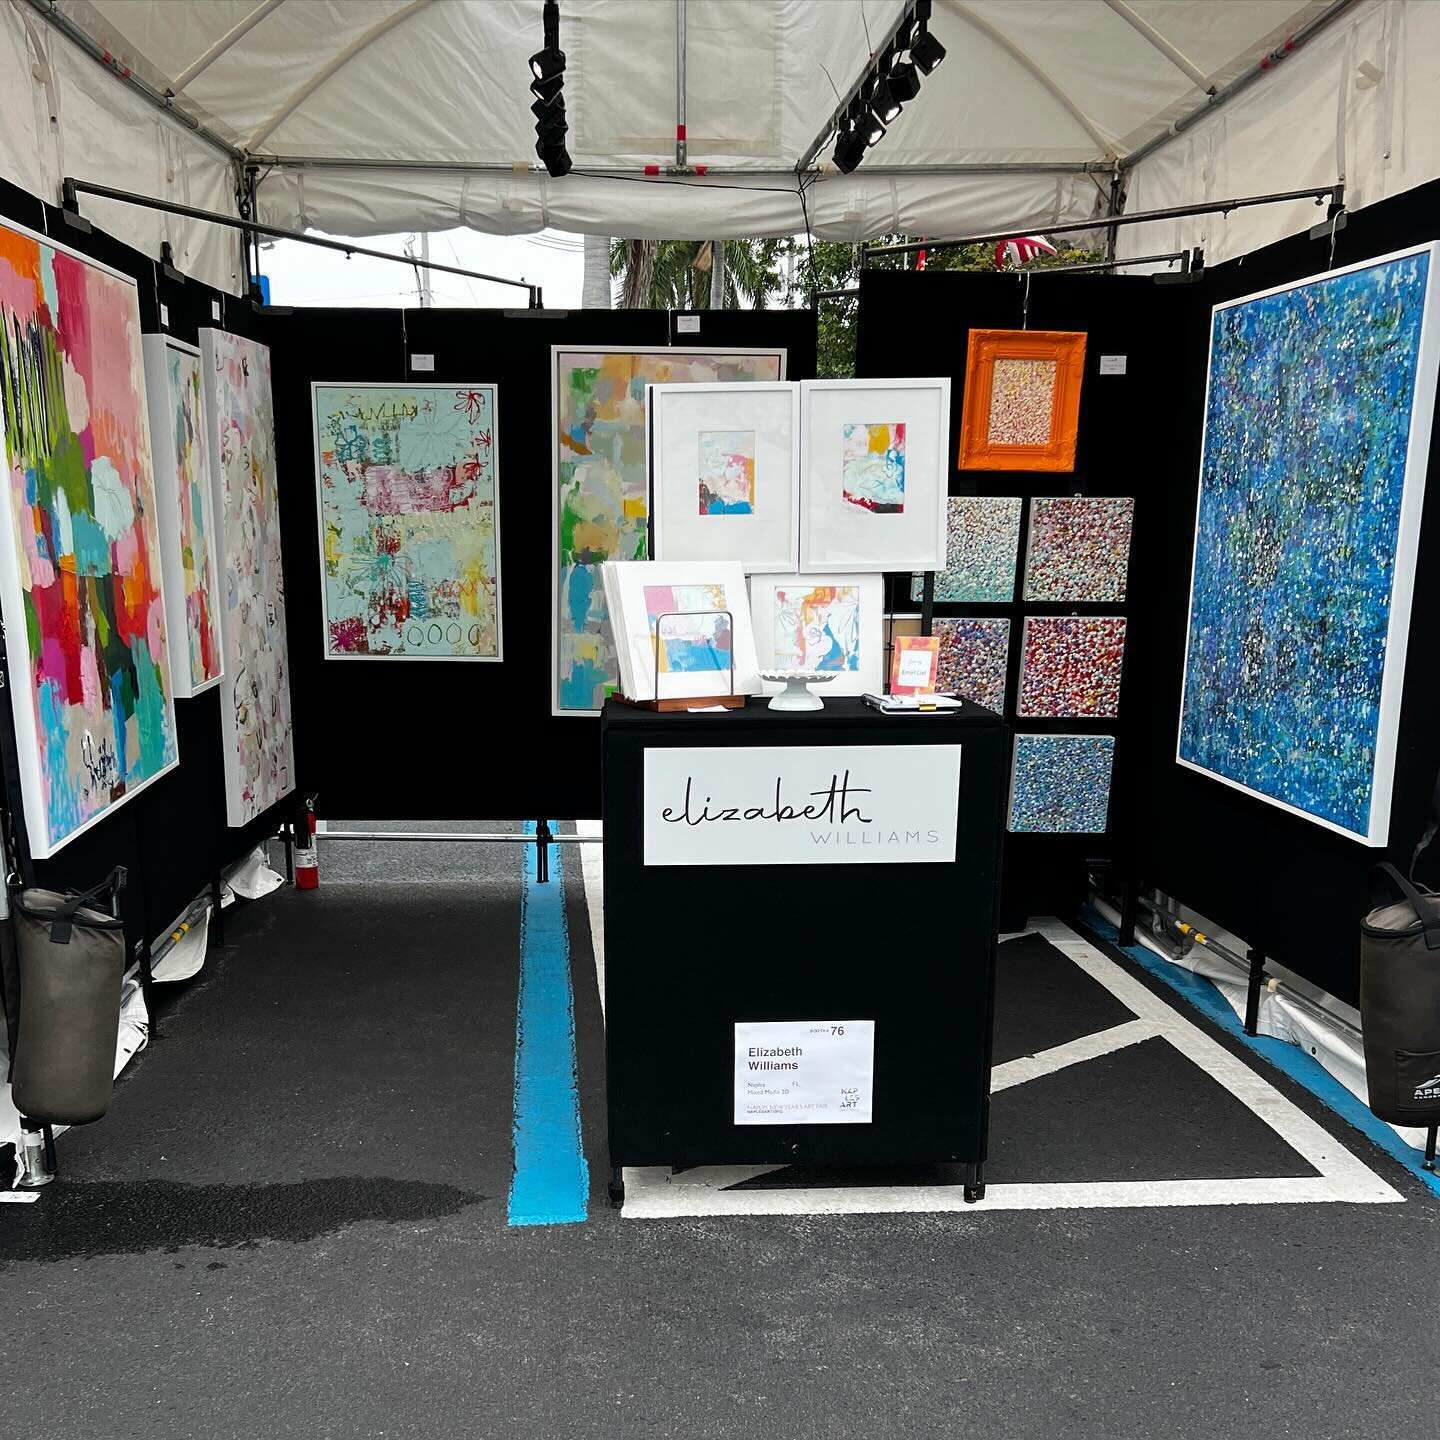 One more day to stop by the Naples New Year&rsquo;s Art Fair!  Cambier Park- downtown Naples FL.  #outdoorartshow #naplesnewyearsartshow #naplesnewyearartfestival  #elizabethwilliamsart